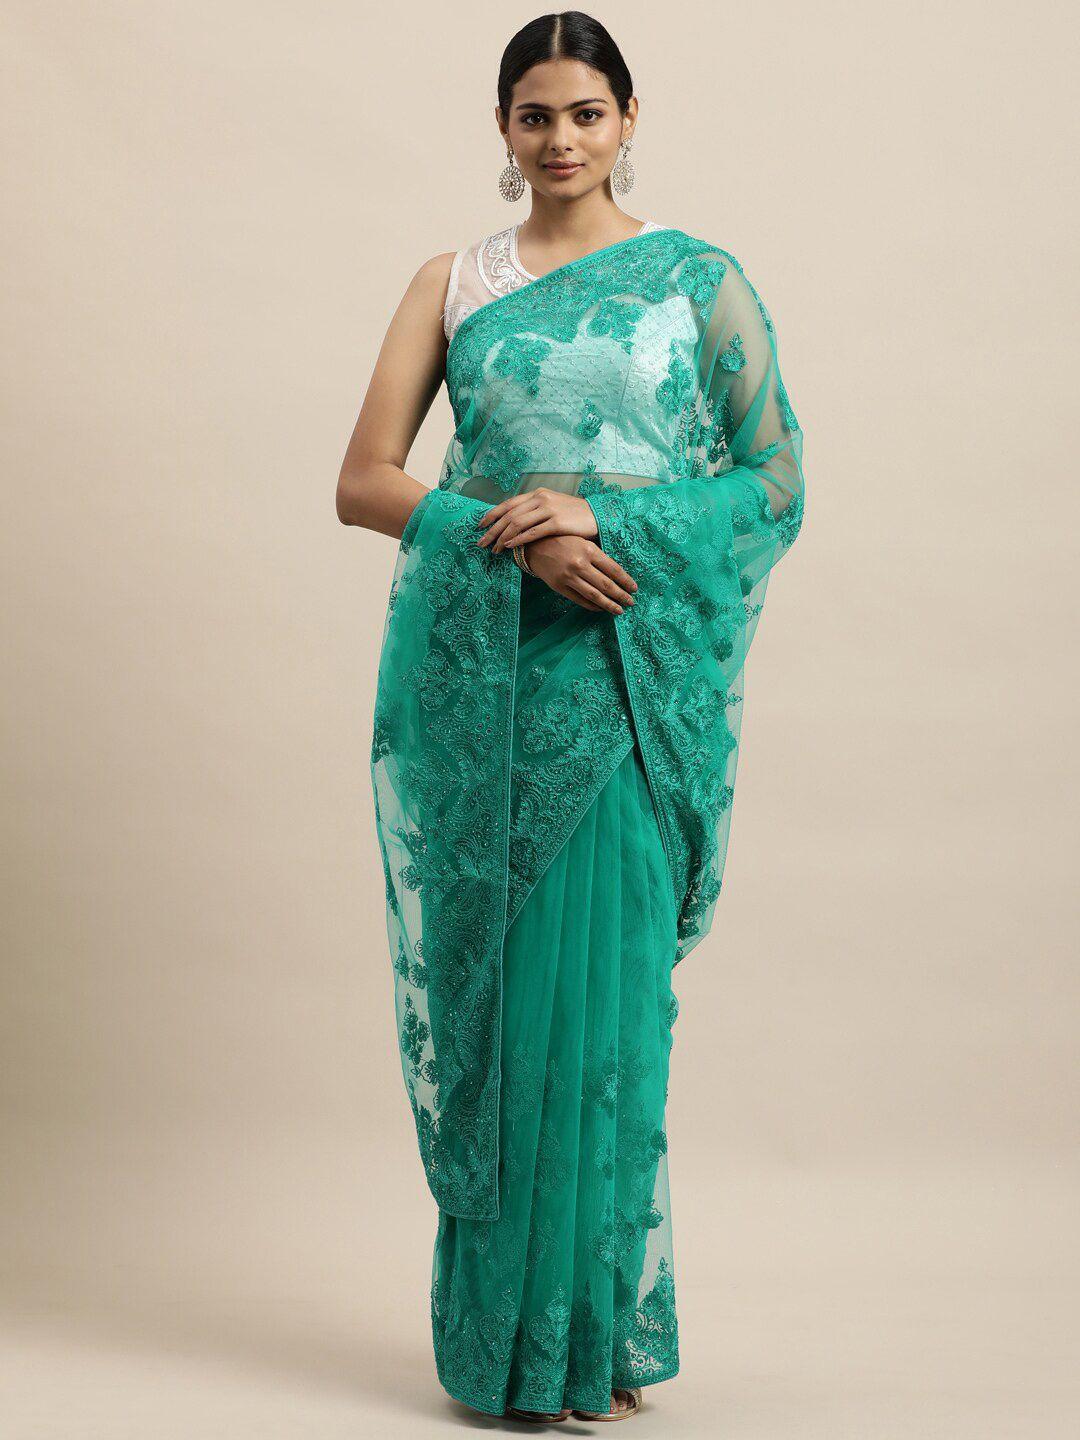 kasee Blue Floral Embroidered Net Saree